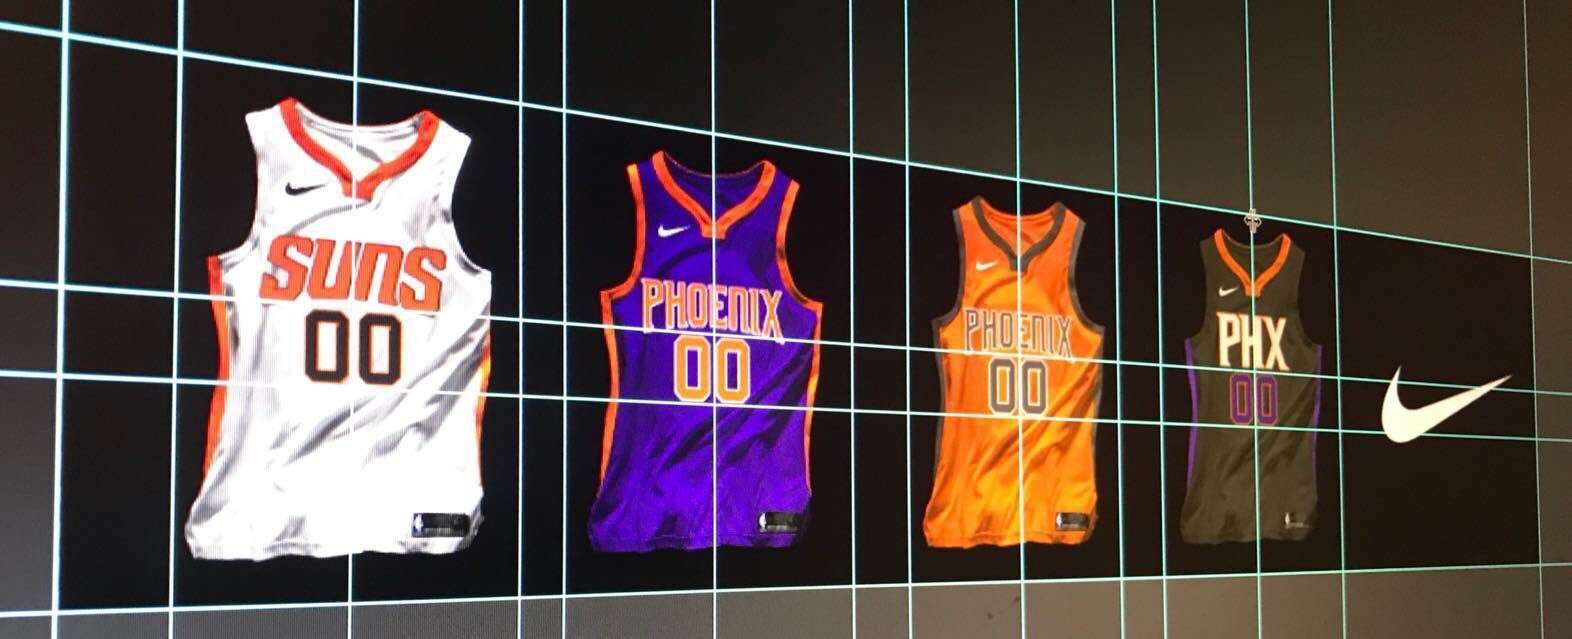 Leak of the Suns new jerseys with Nike 